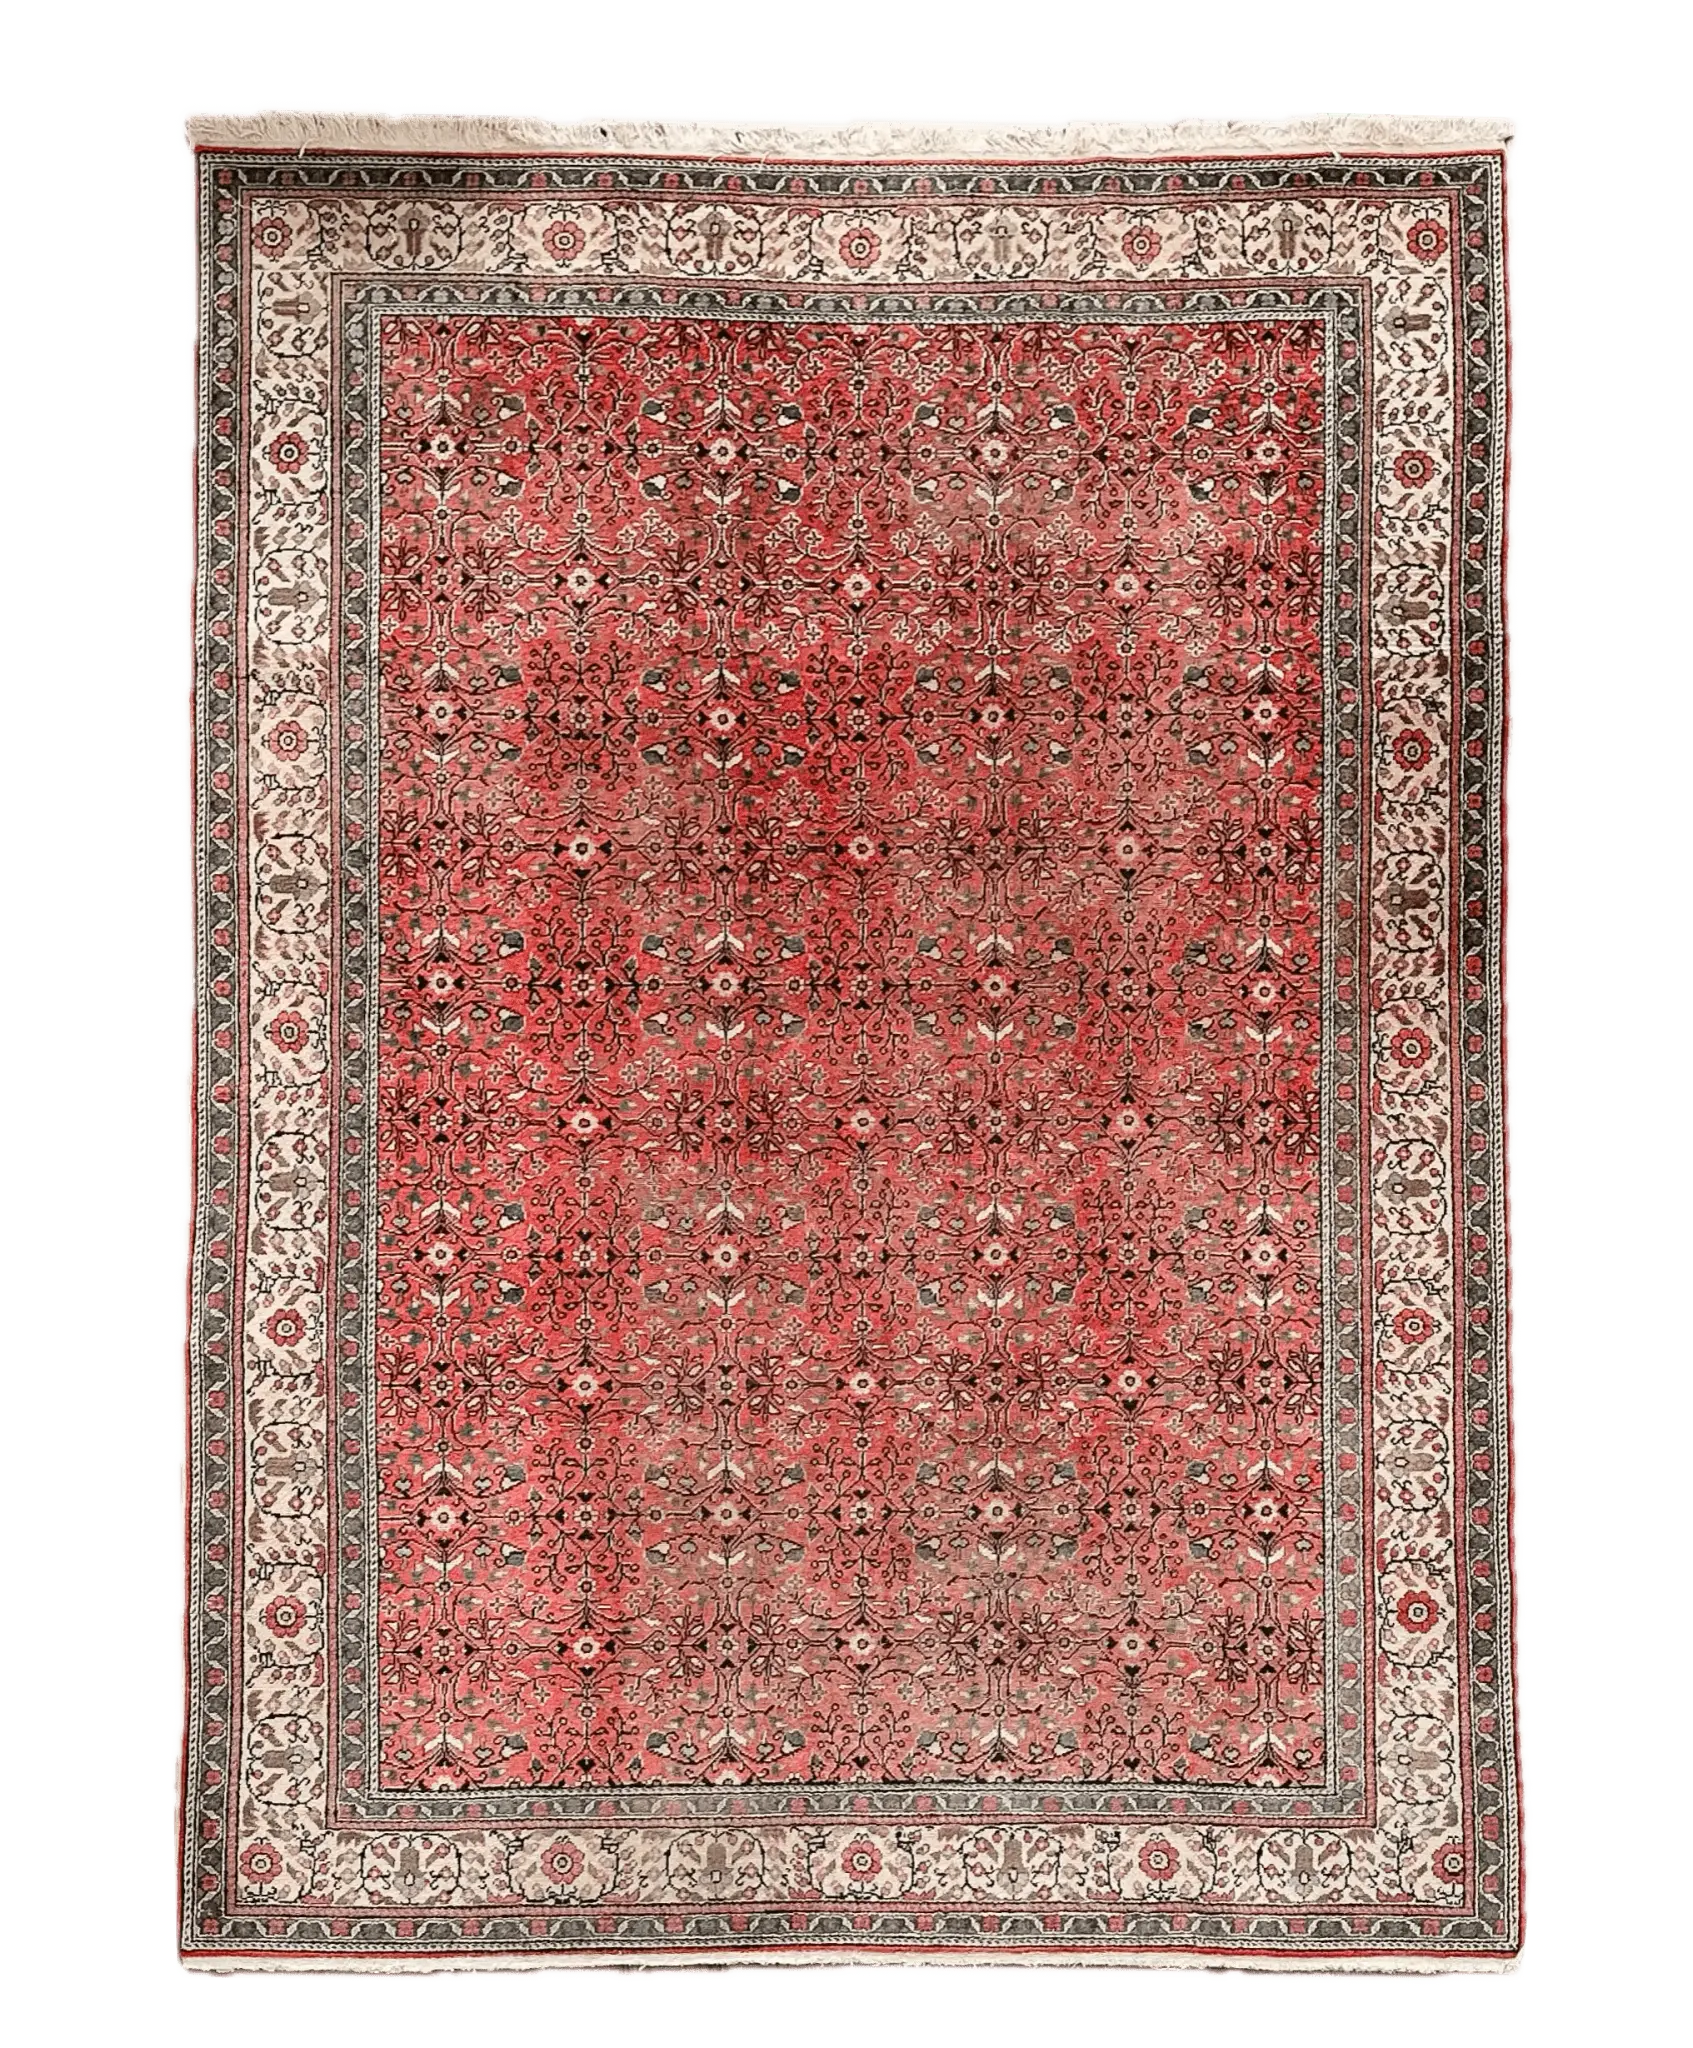 Vintage Hand Knotted Rug # 3157 | 6’ 6” x 9’ 6” - Krazy For Rugs